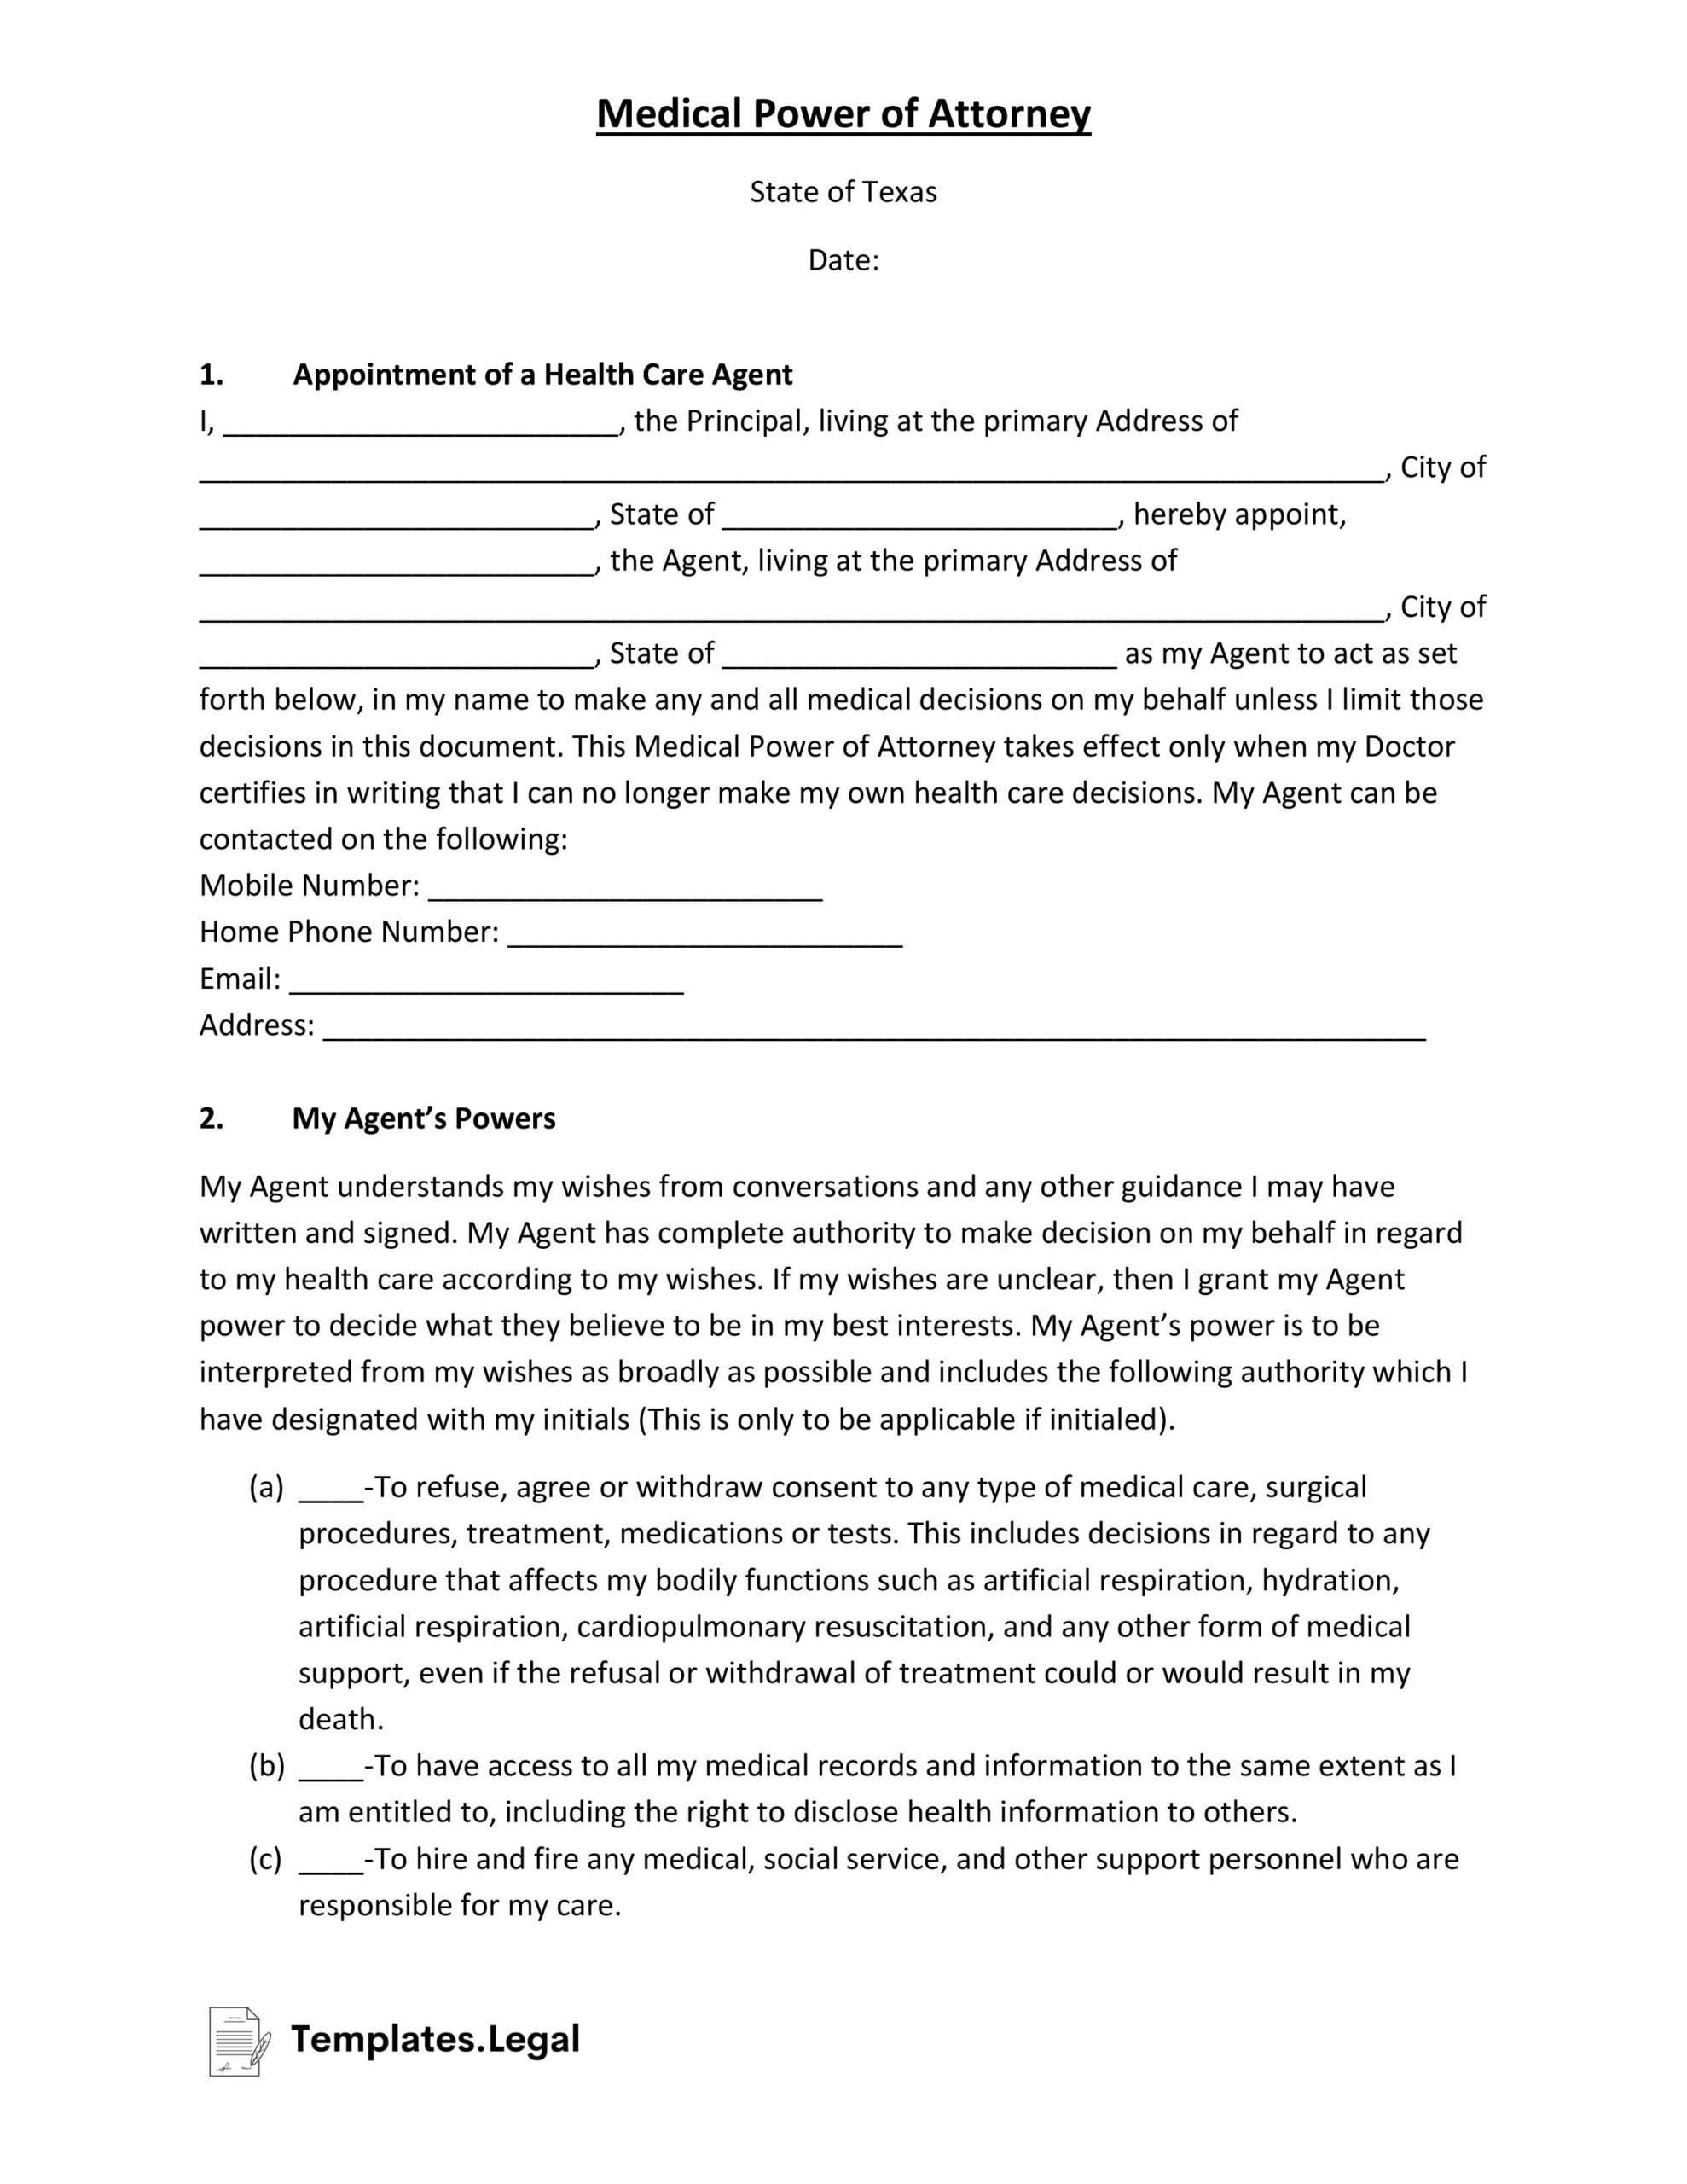 Texas Medical Power of Attorney- Templates.Legal